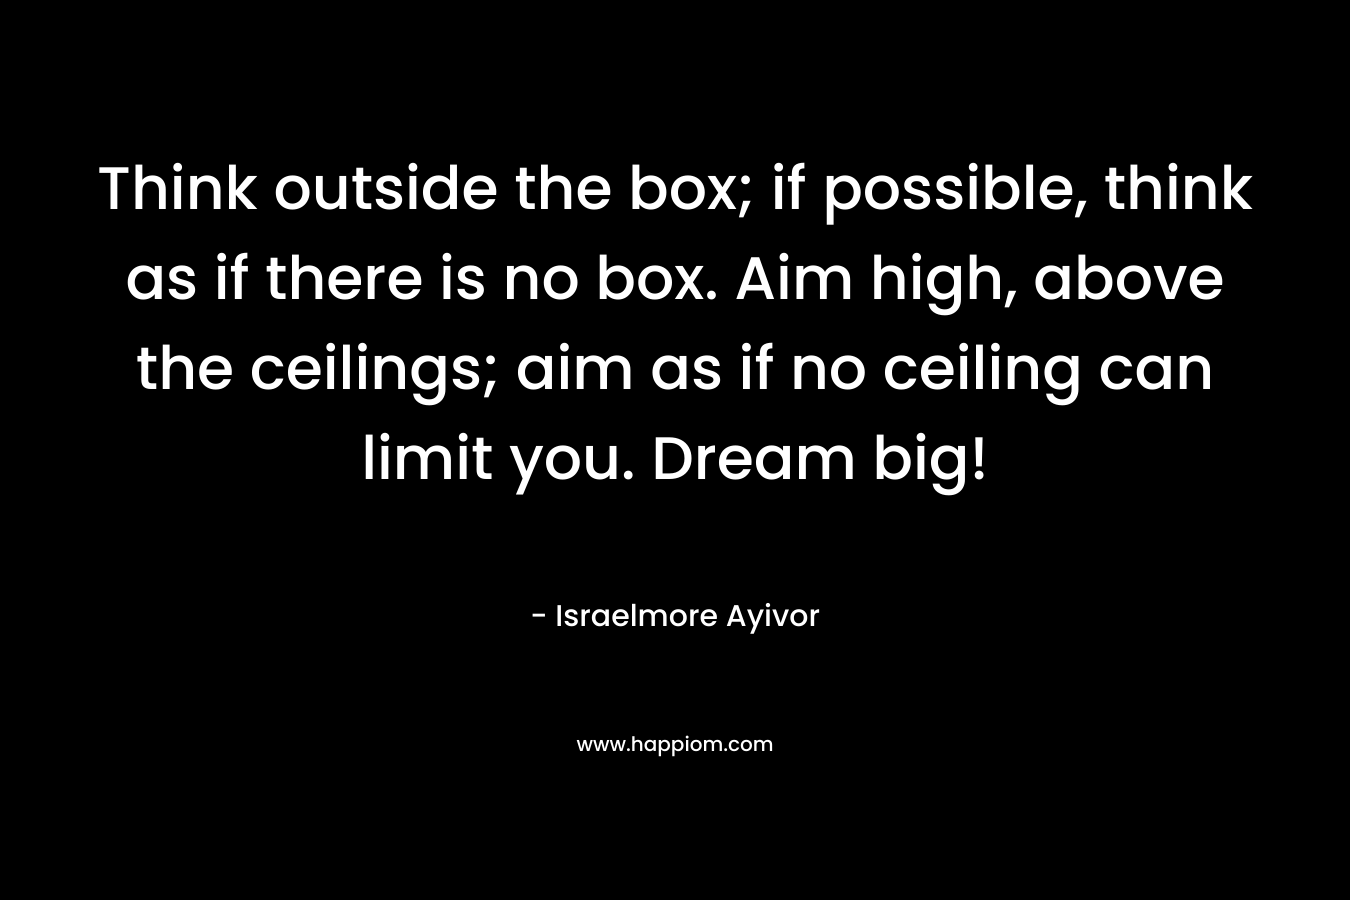 Think outside the box; if possible, think as if there is no box. Aim high, above the ceilings; aim as if no ceiling can limit you. Dream big! – Israelmore Ayivor